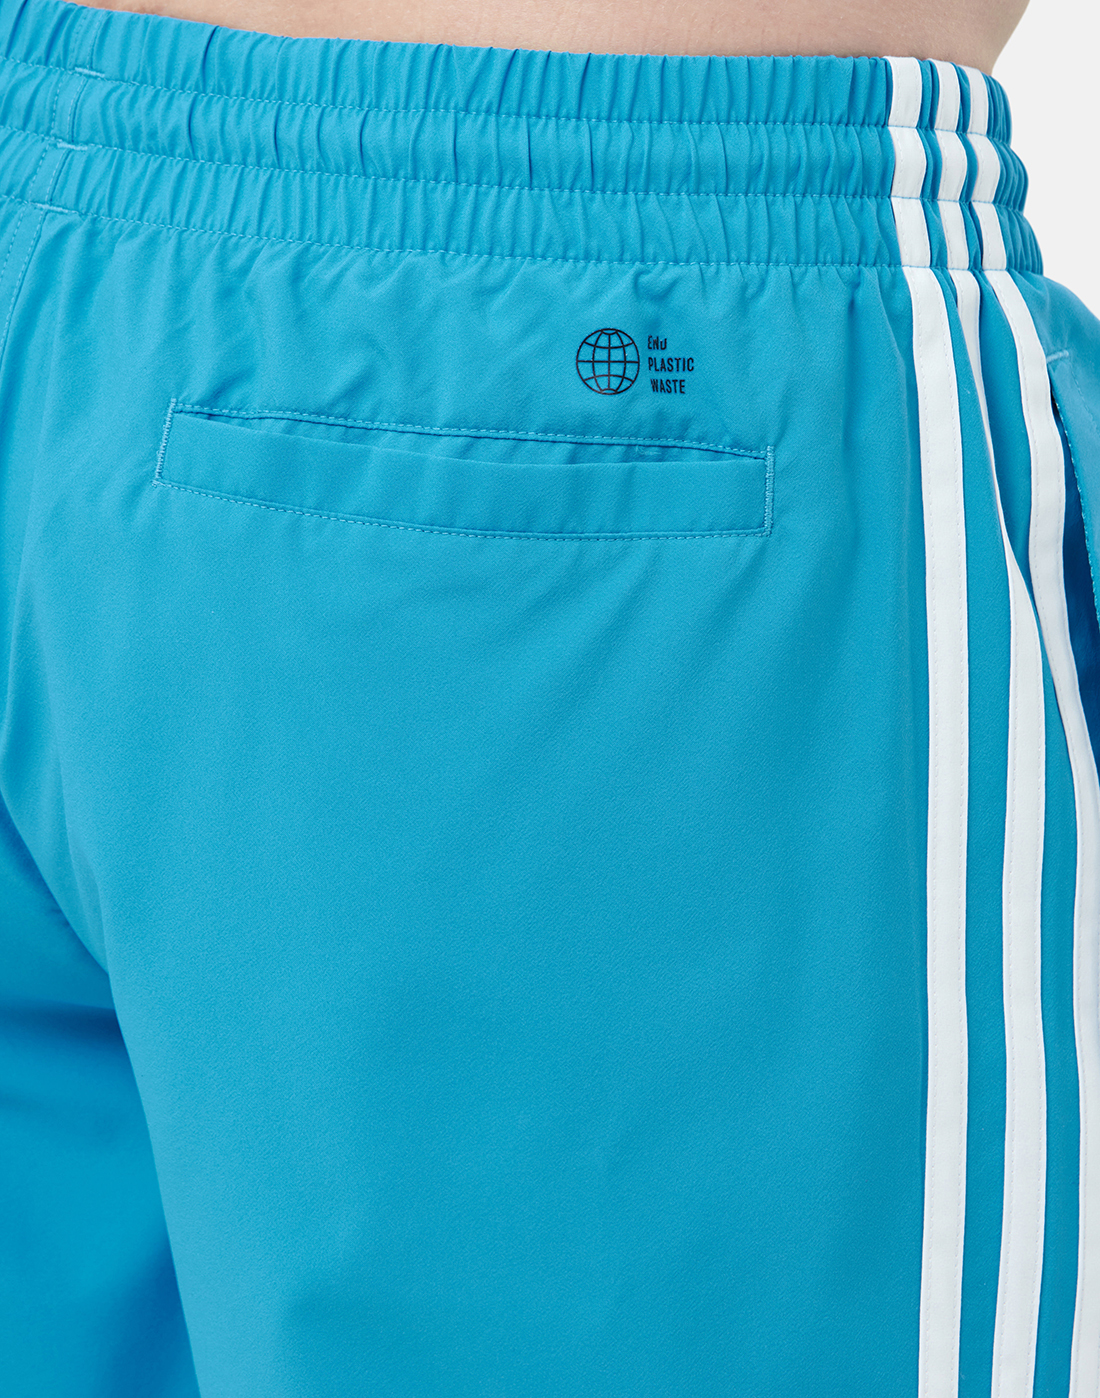 adidas Originals Mens Trace Shorts - Blue | Life Style Sports IE